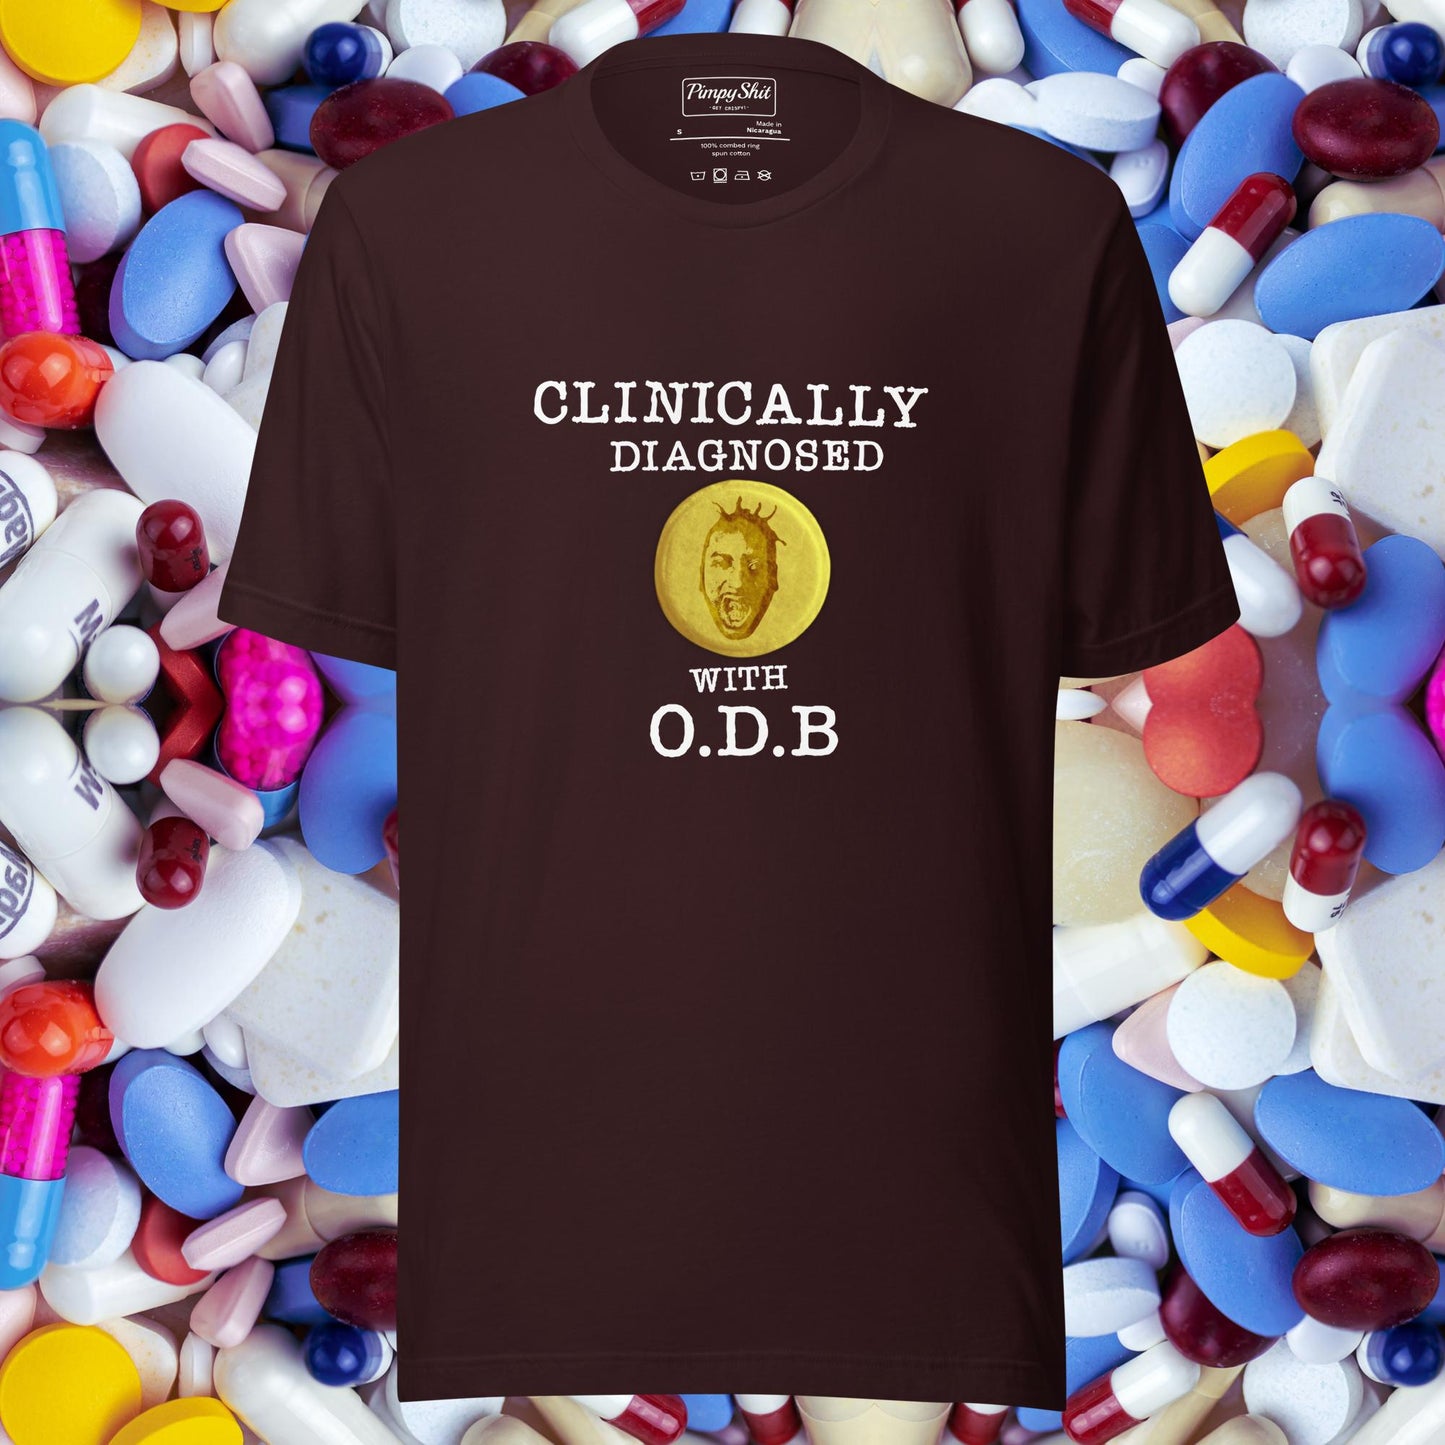 Clinically Diagnosed with O.D.B. (Wu Tang Forever)